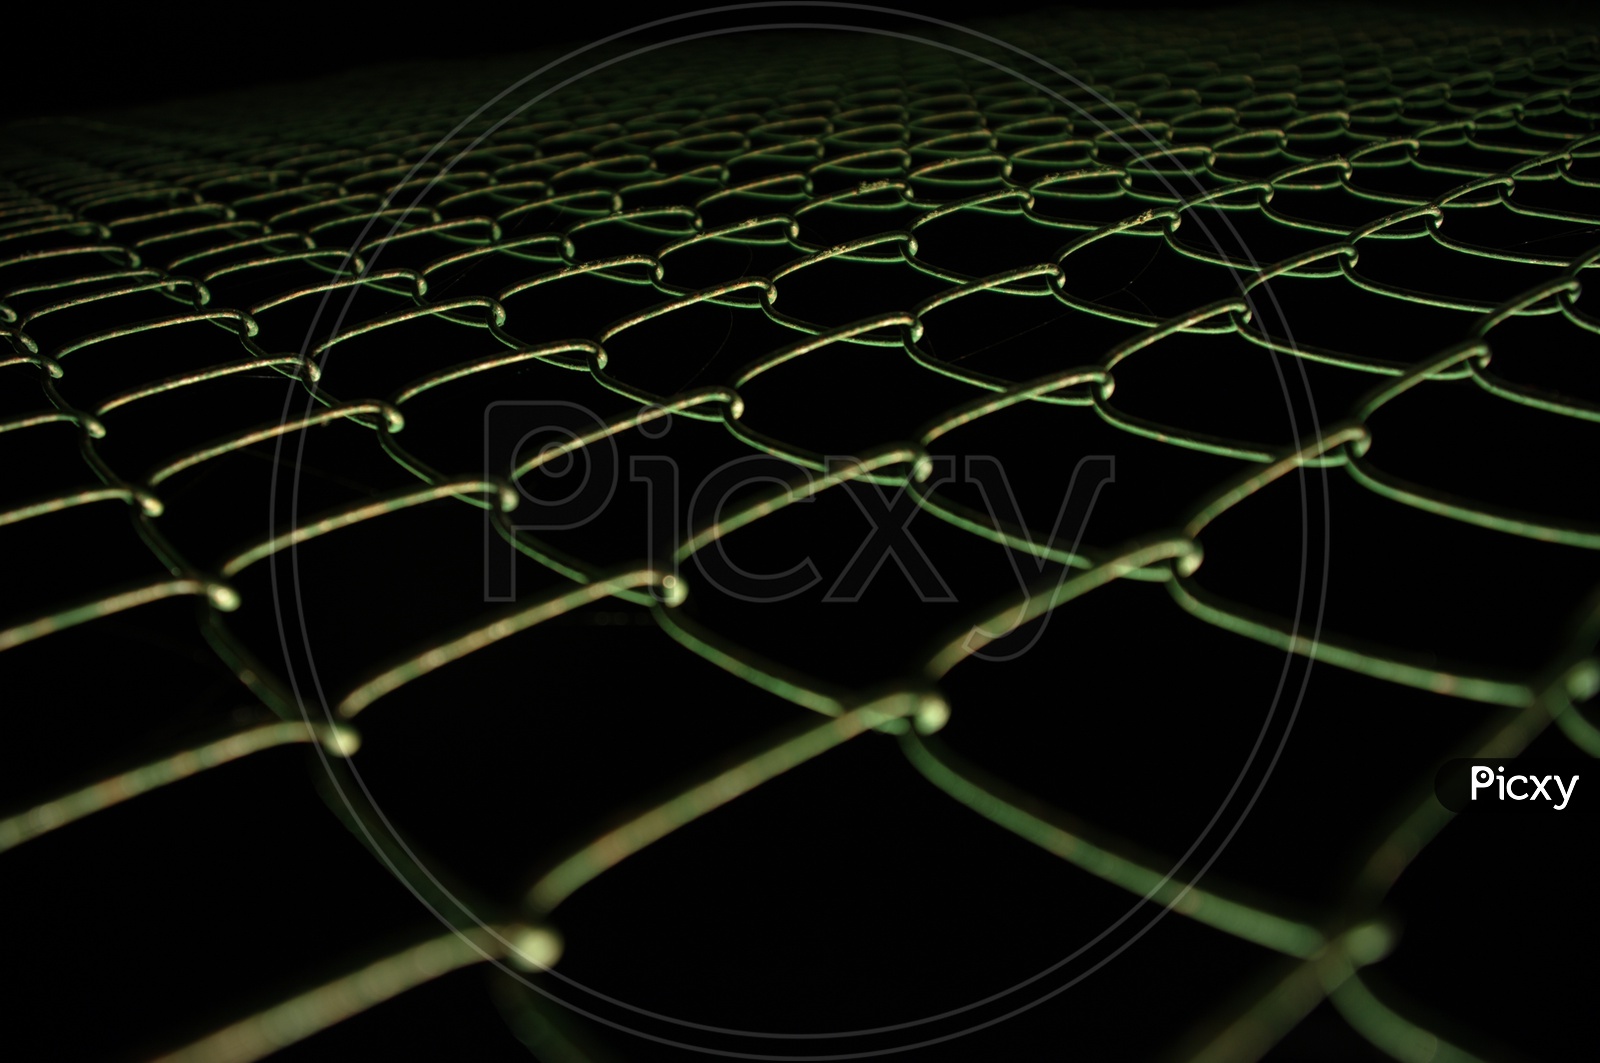 A metal wire fencing abstract